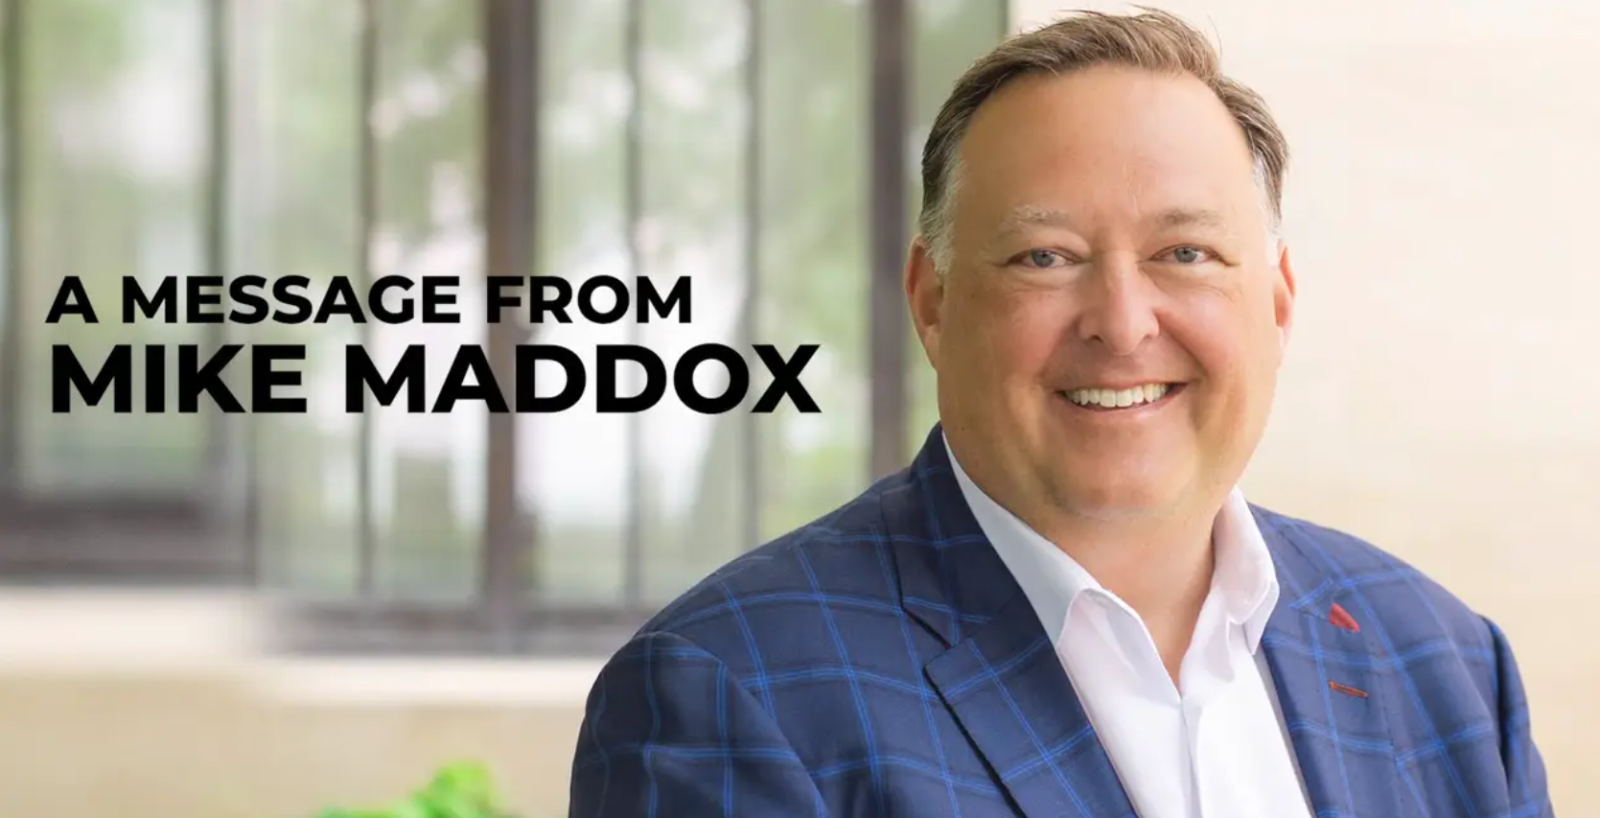 image of Mike Maddox